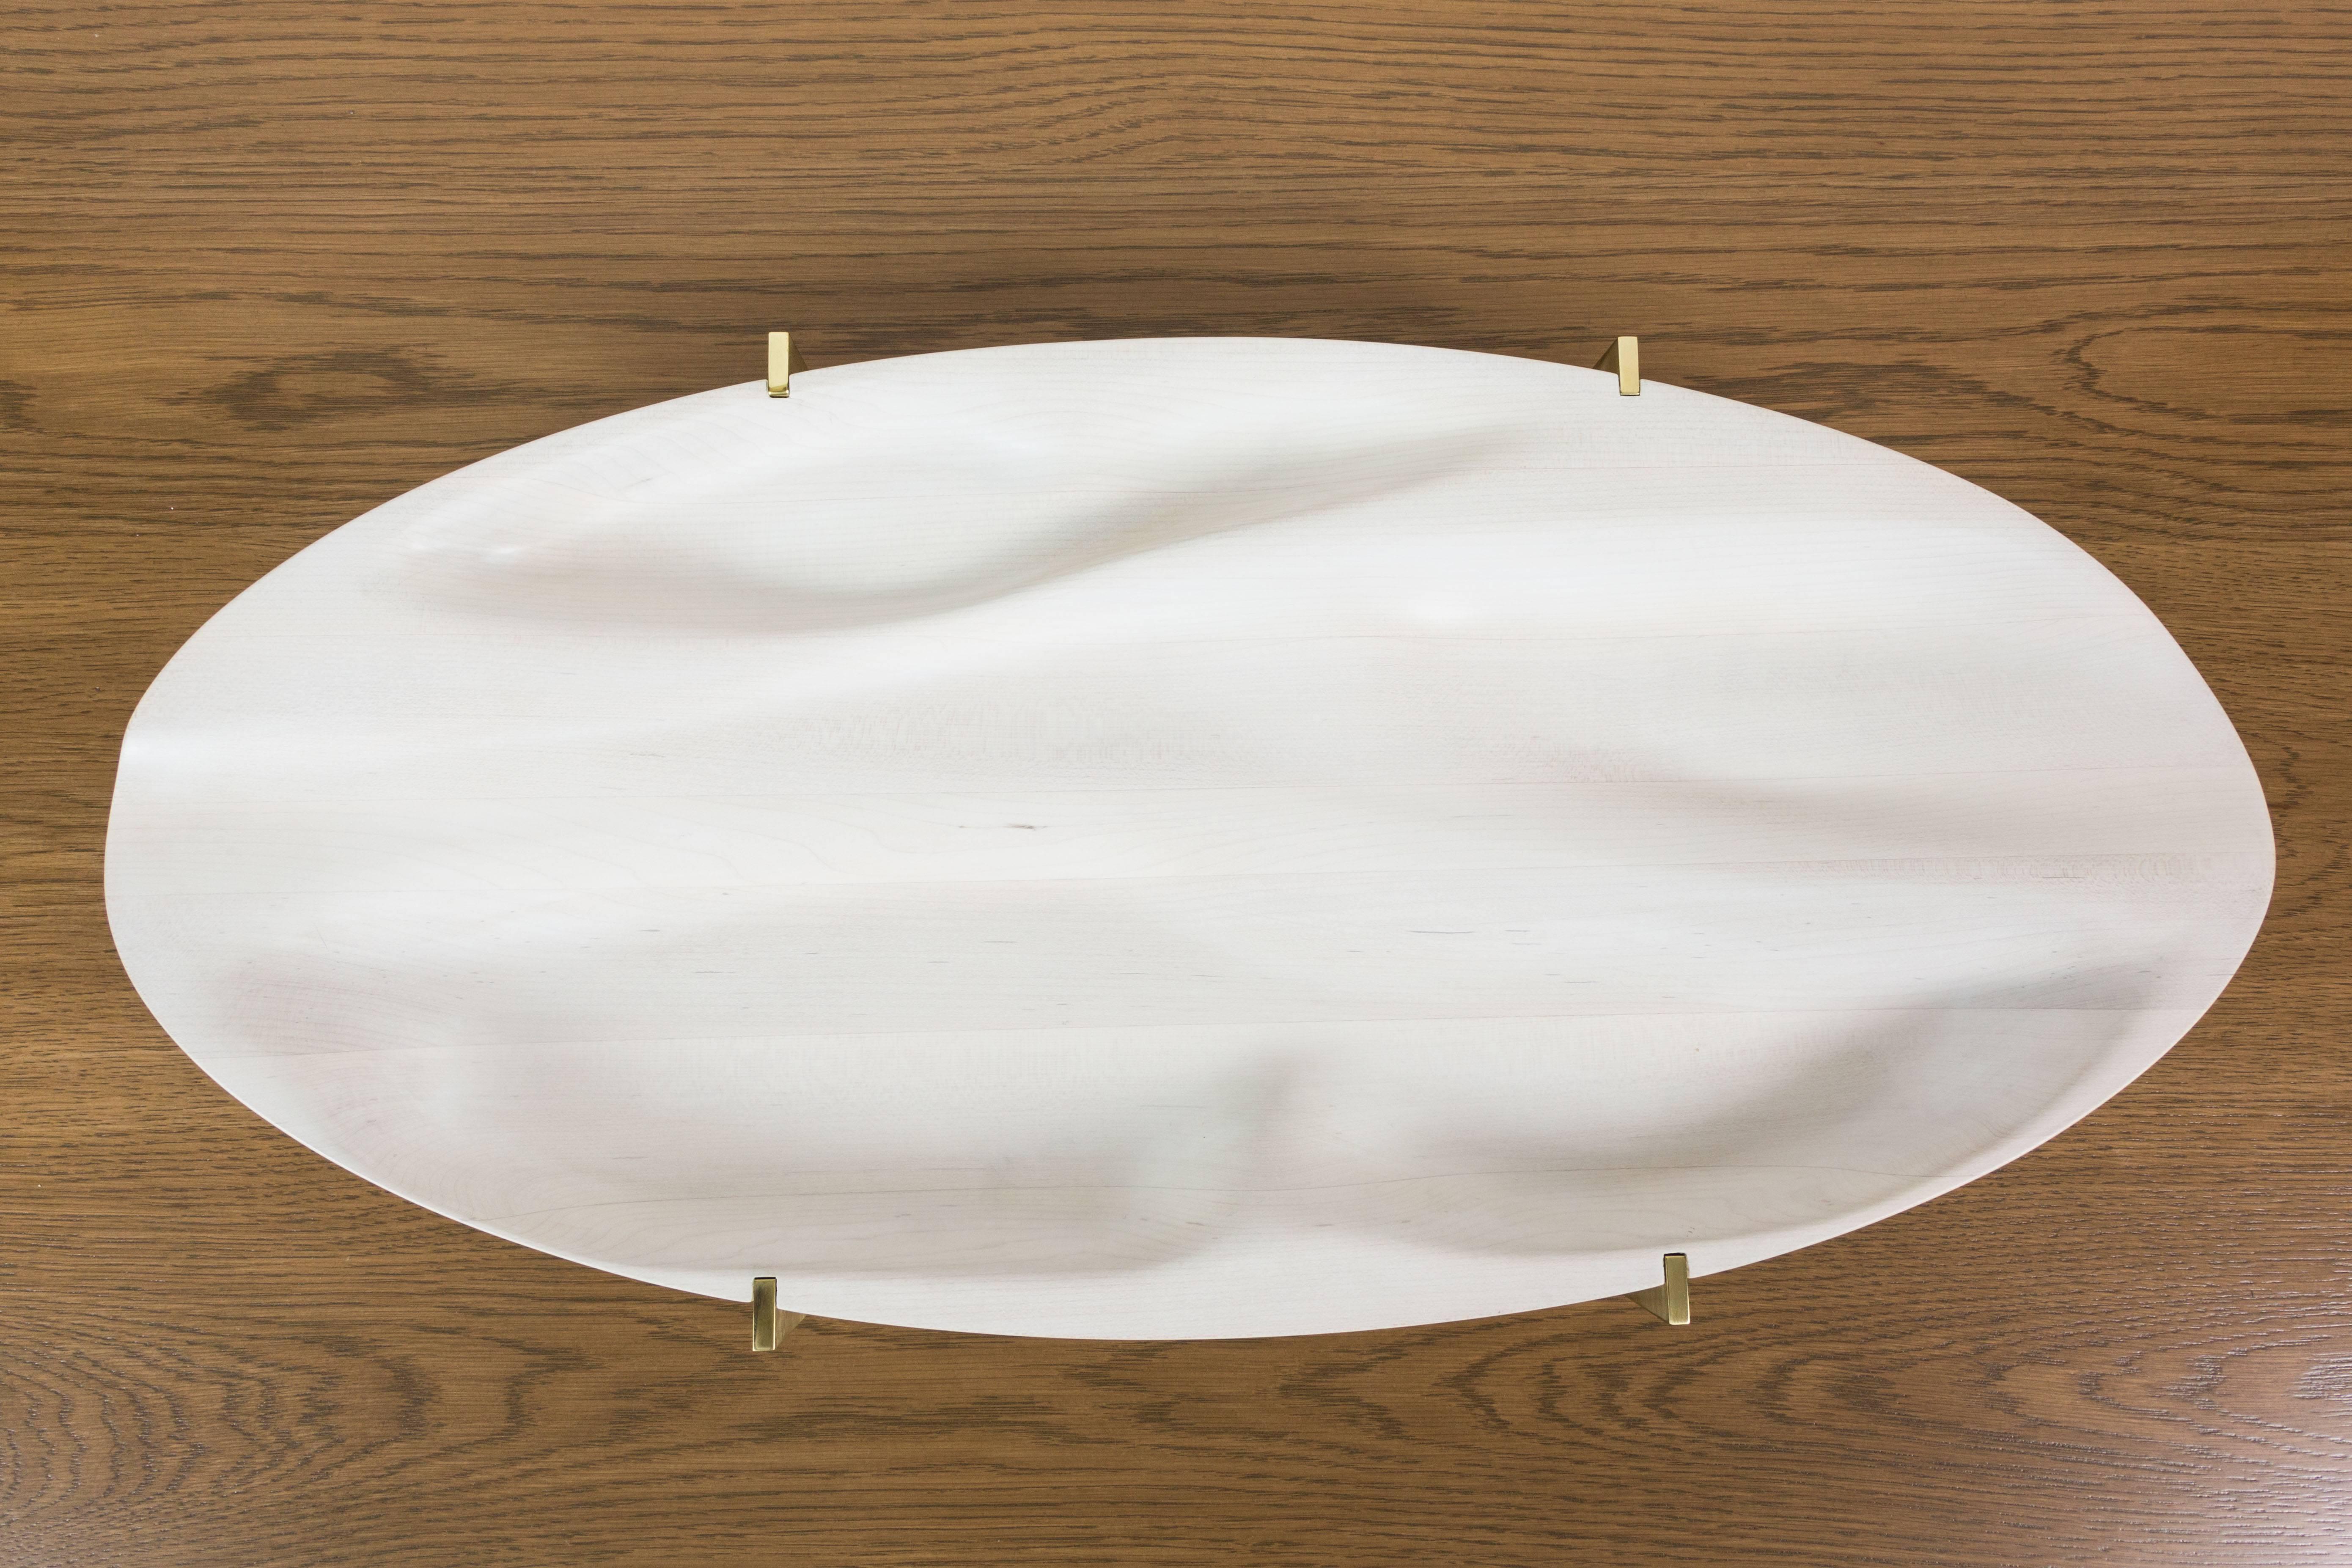 Bleached Maple and Brass Oval Tray by Vincent Pocsik for Lawson-Fenning 2